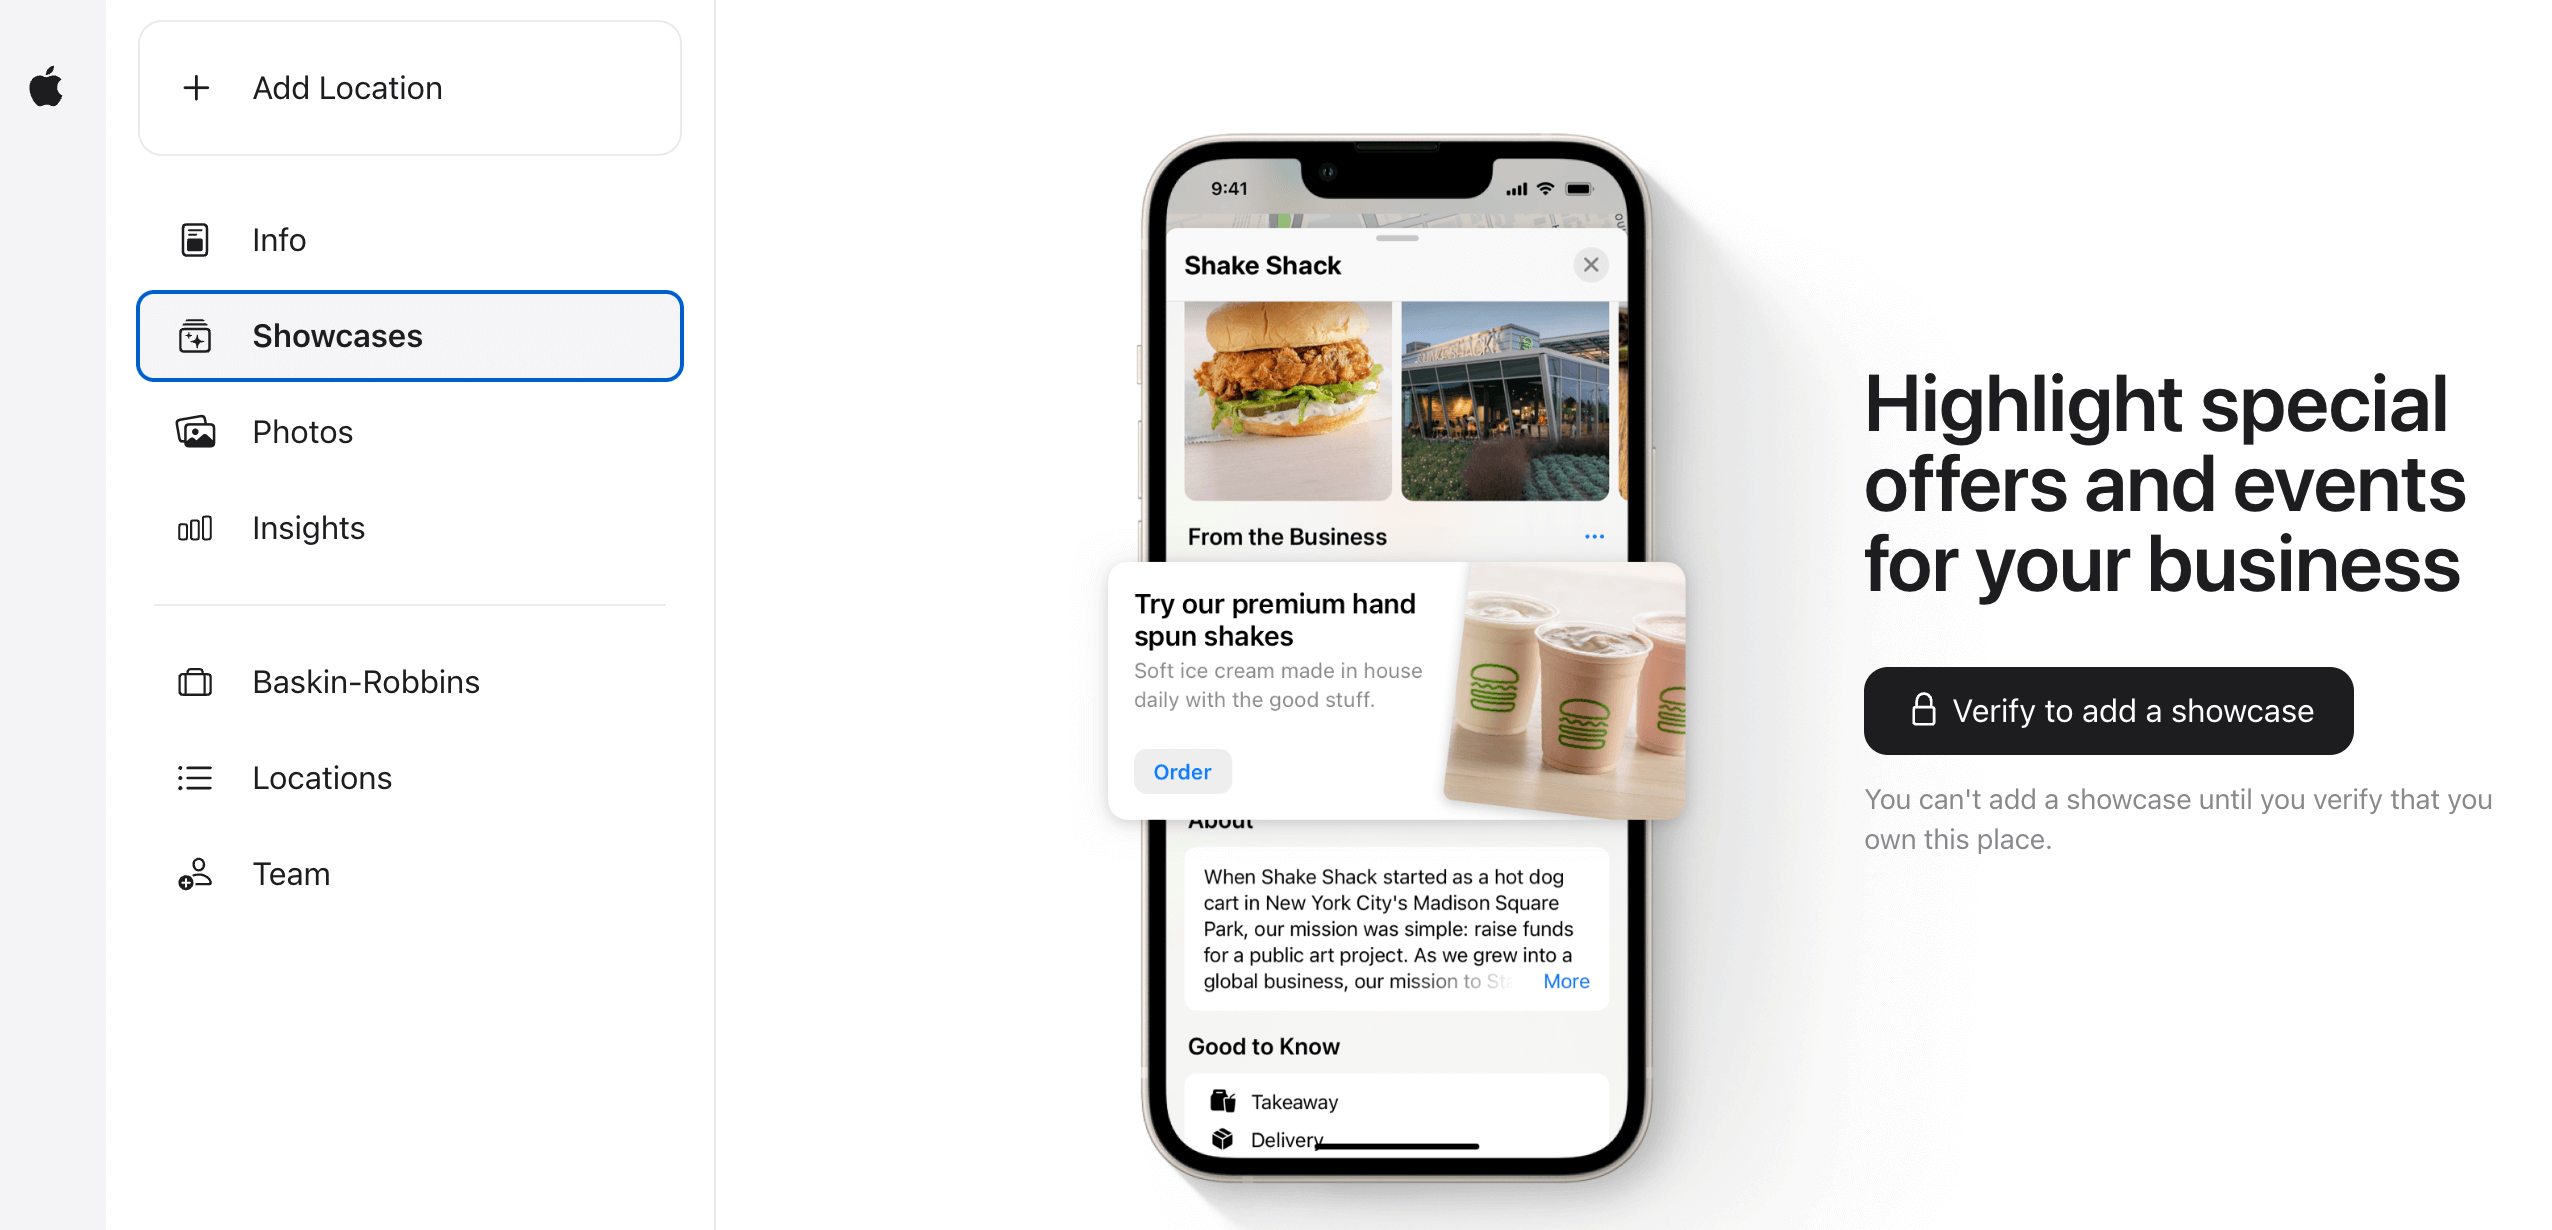 Highlight special offers and events for your local business by using Showcases in Apple Business Connect.